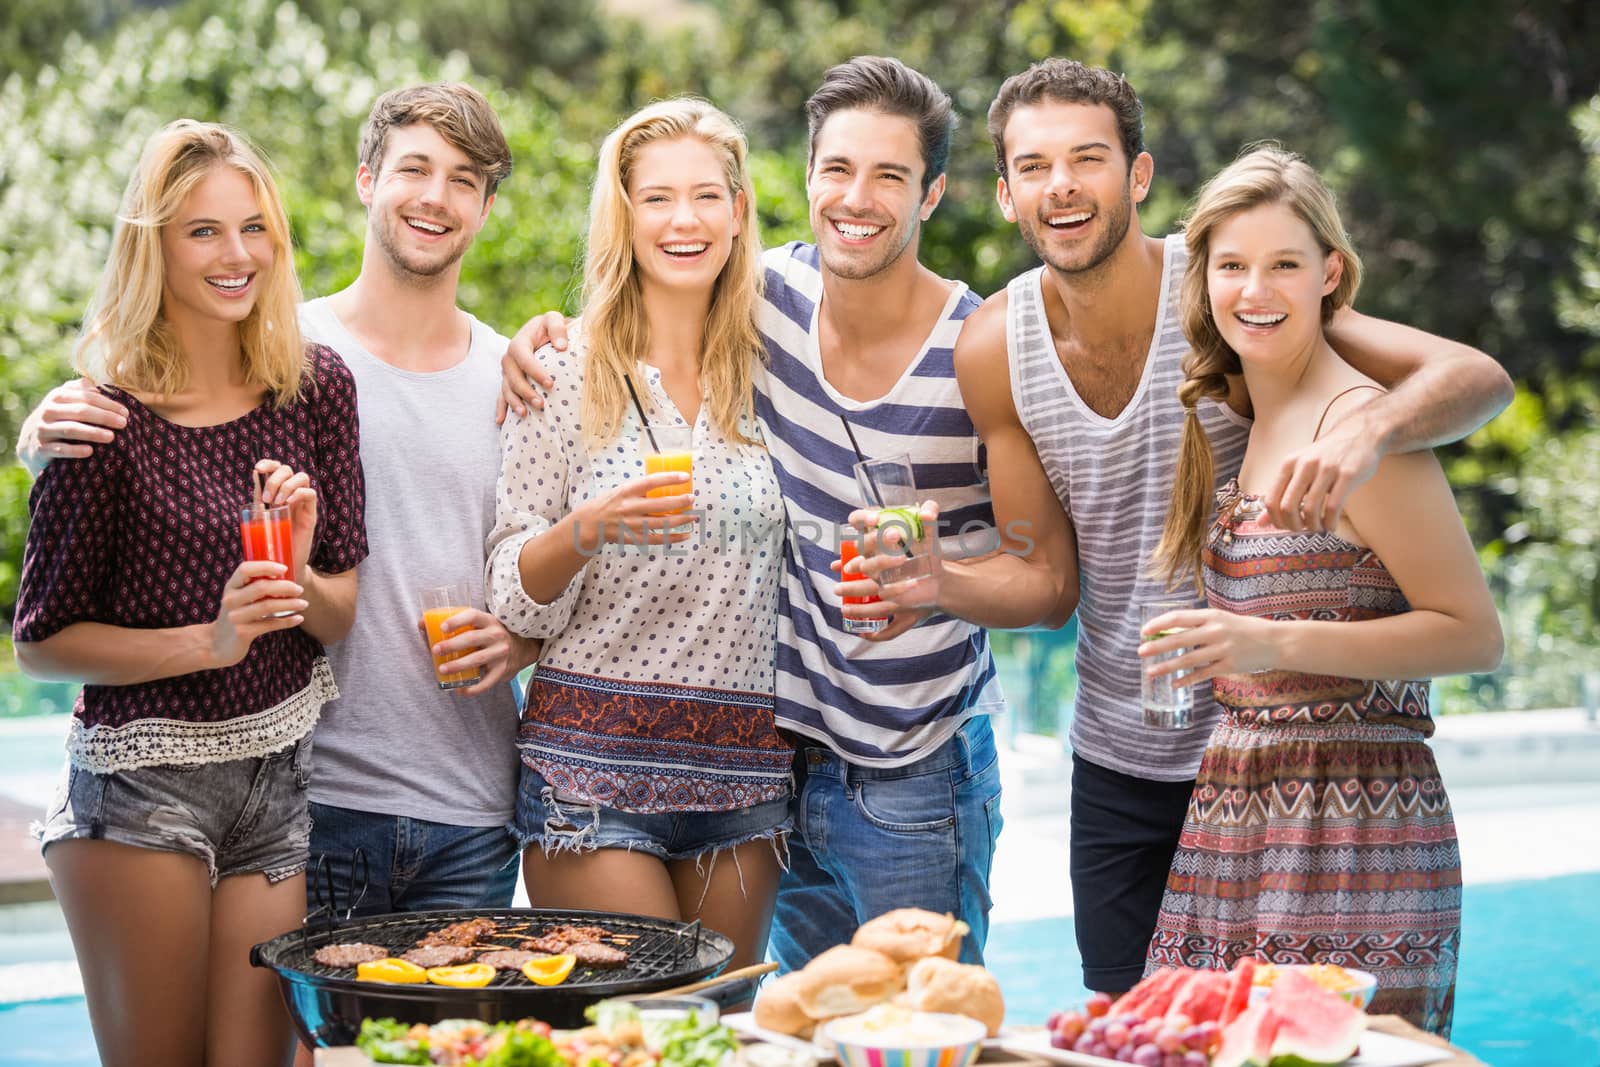 Portrait of friends having juice at outdoors barbecue party near pool